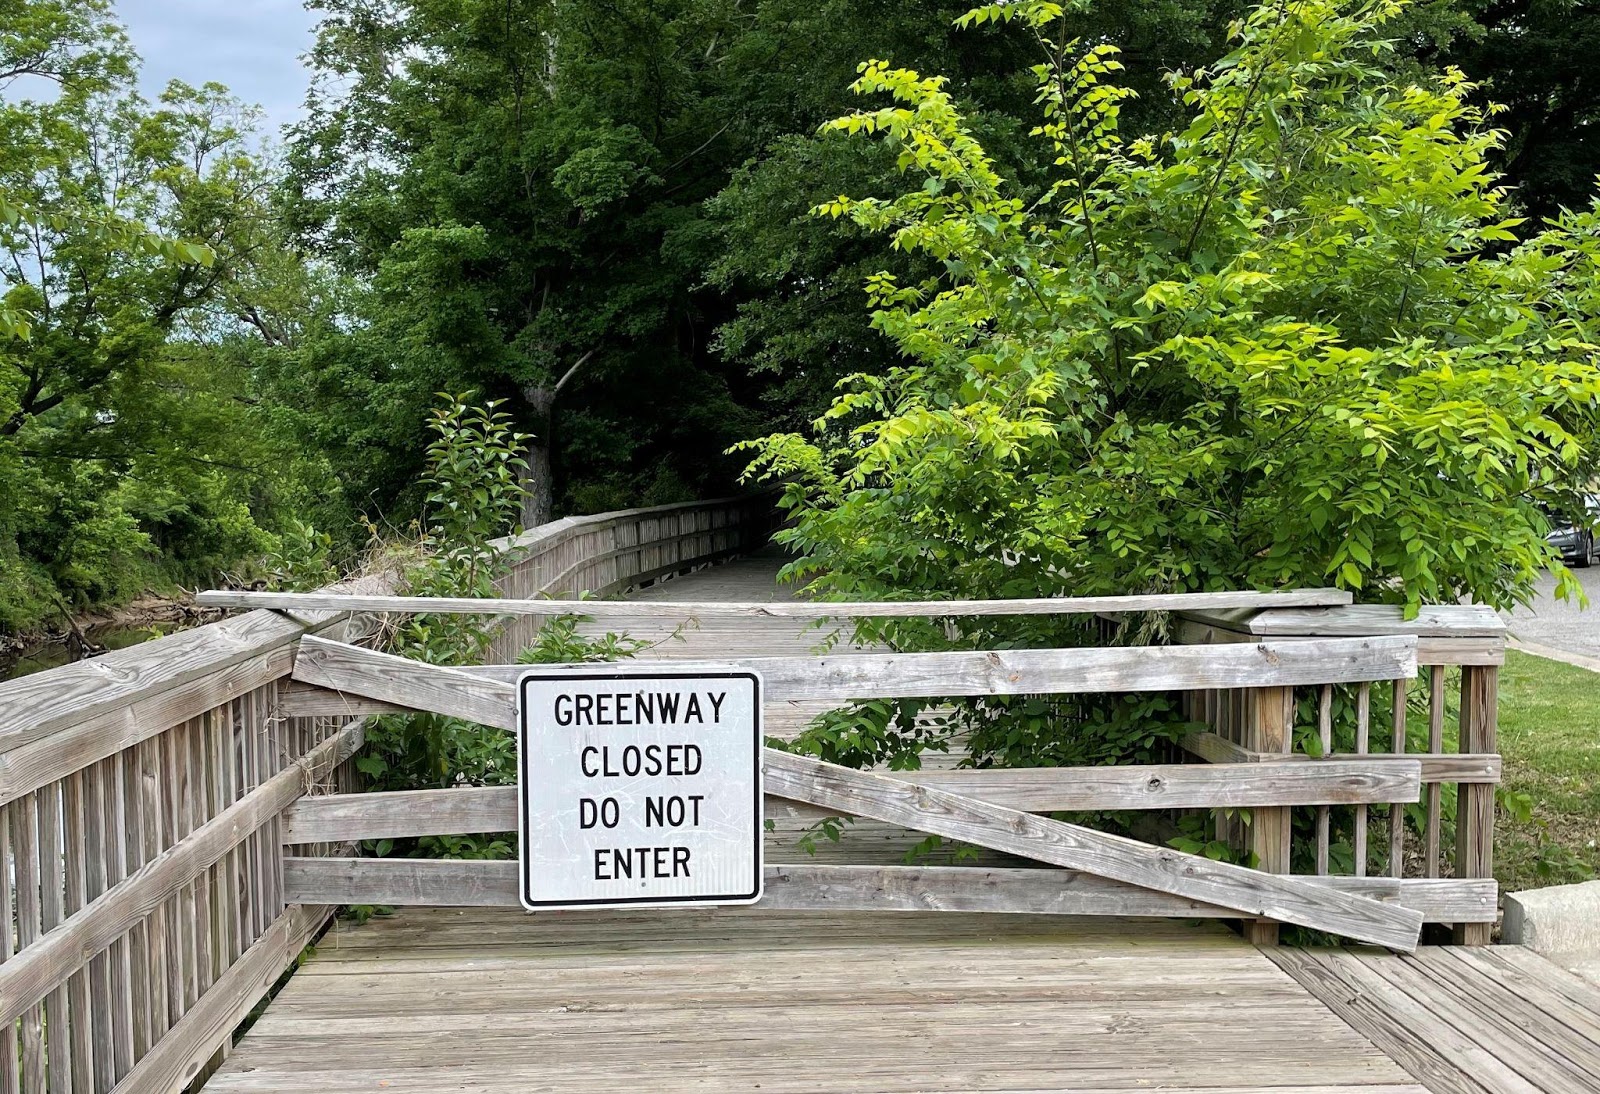 Crabtree Creek Trail: From Repair to Reopen and Riding Again